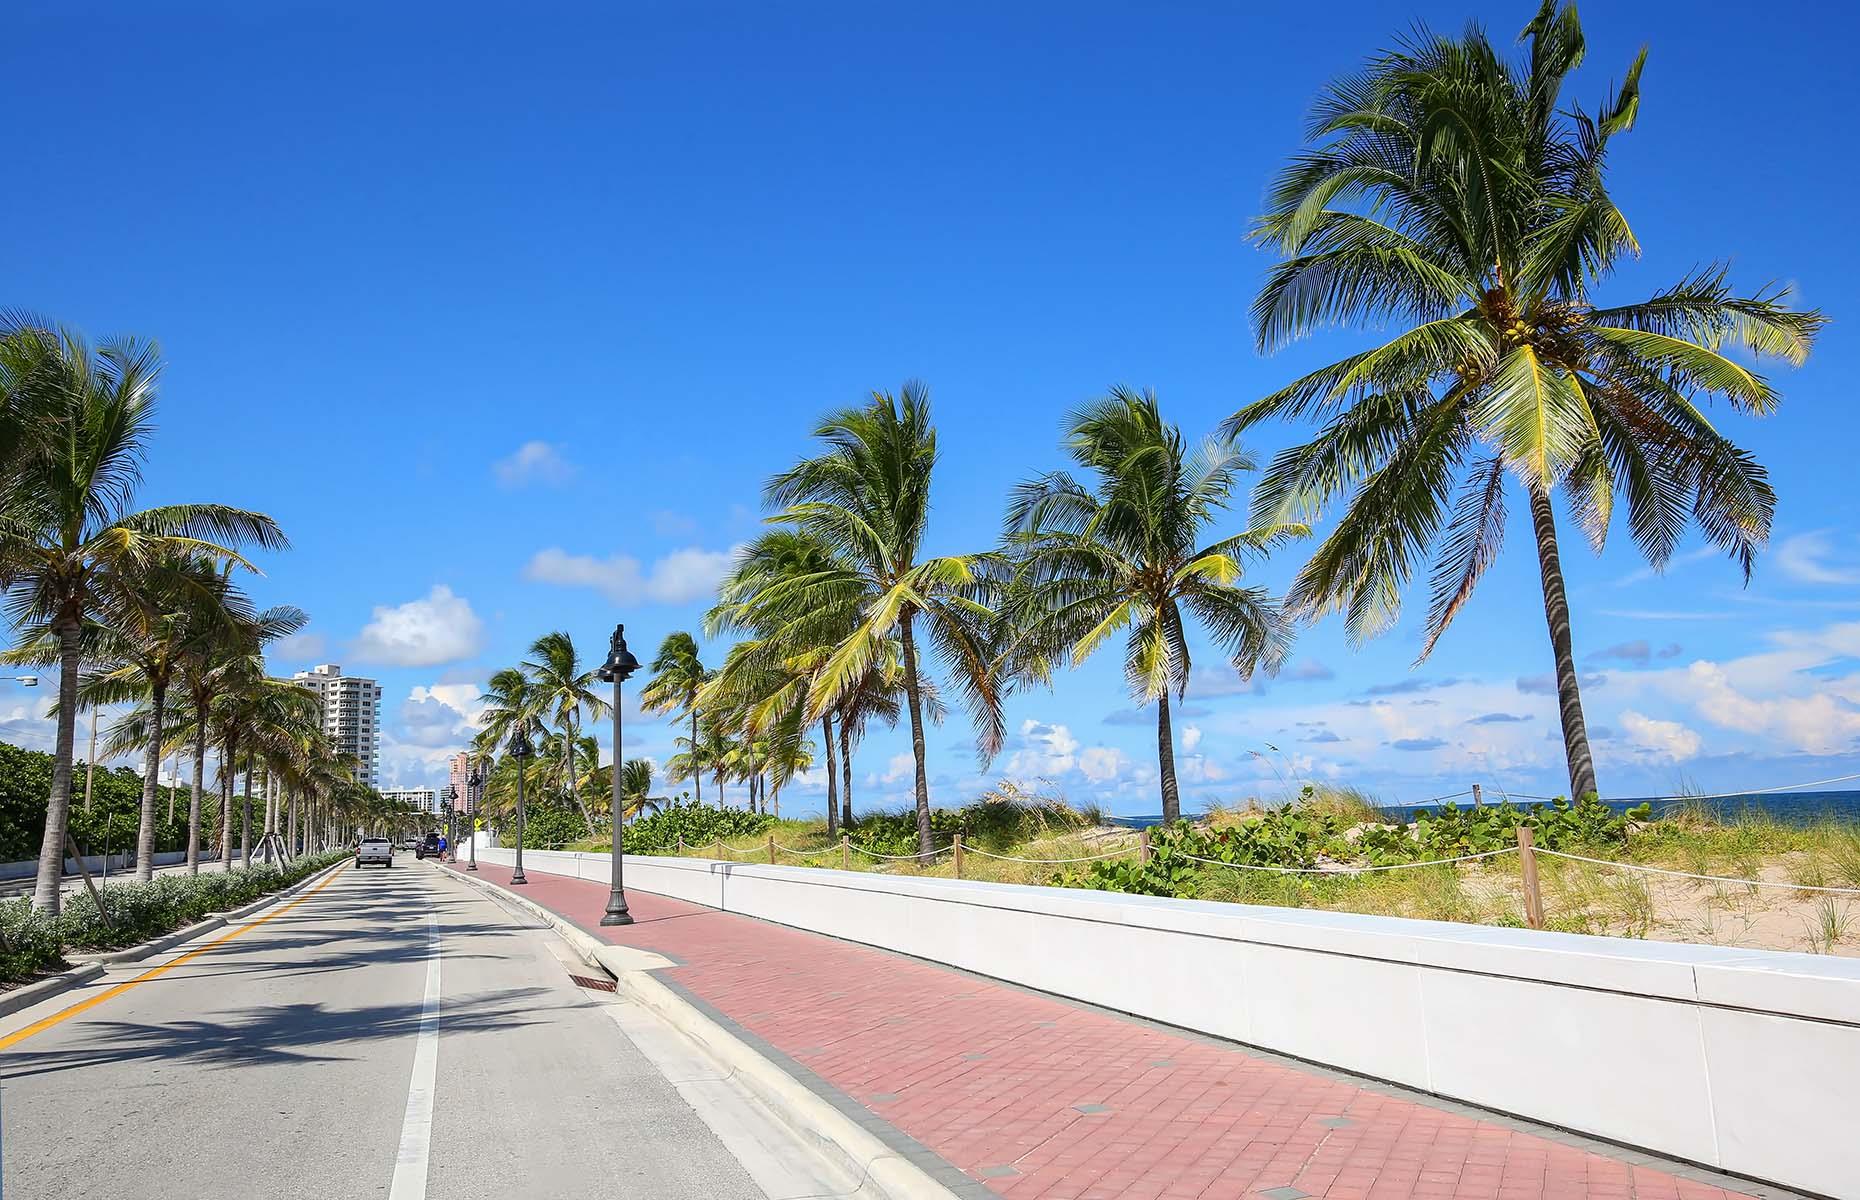 <p>A total stunner of a road trip, <a href="https://scenica1a.org/">this 72-mile (116km) route</a> winds its way along a narrow barrier island, hugged by the Atlantic on one side, the Intercoastal Waterway on the other. It's worth driving this road for the glistening views and inviting white sand beaches alone, but there are plenty of stops to make too, like the historic city of St Augustine and multiple nature reserves and wildlife refuges. Technically, the drive starts at Ponte Vedra Beach and ends at Flagler Beach, but many road trippers continue their way further south to Daytona Beach.</p>